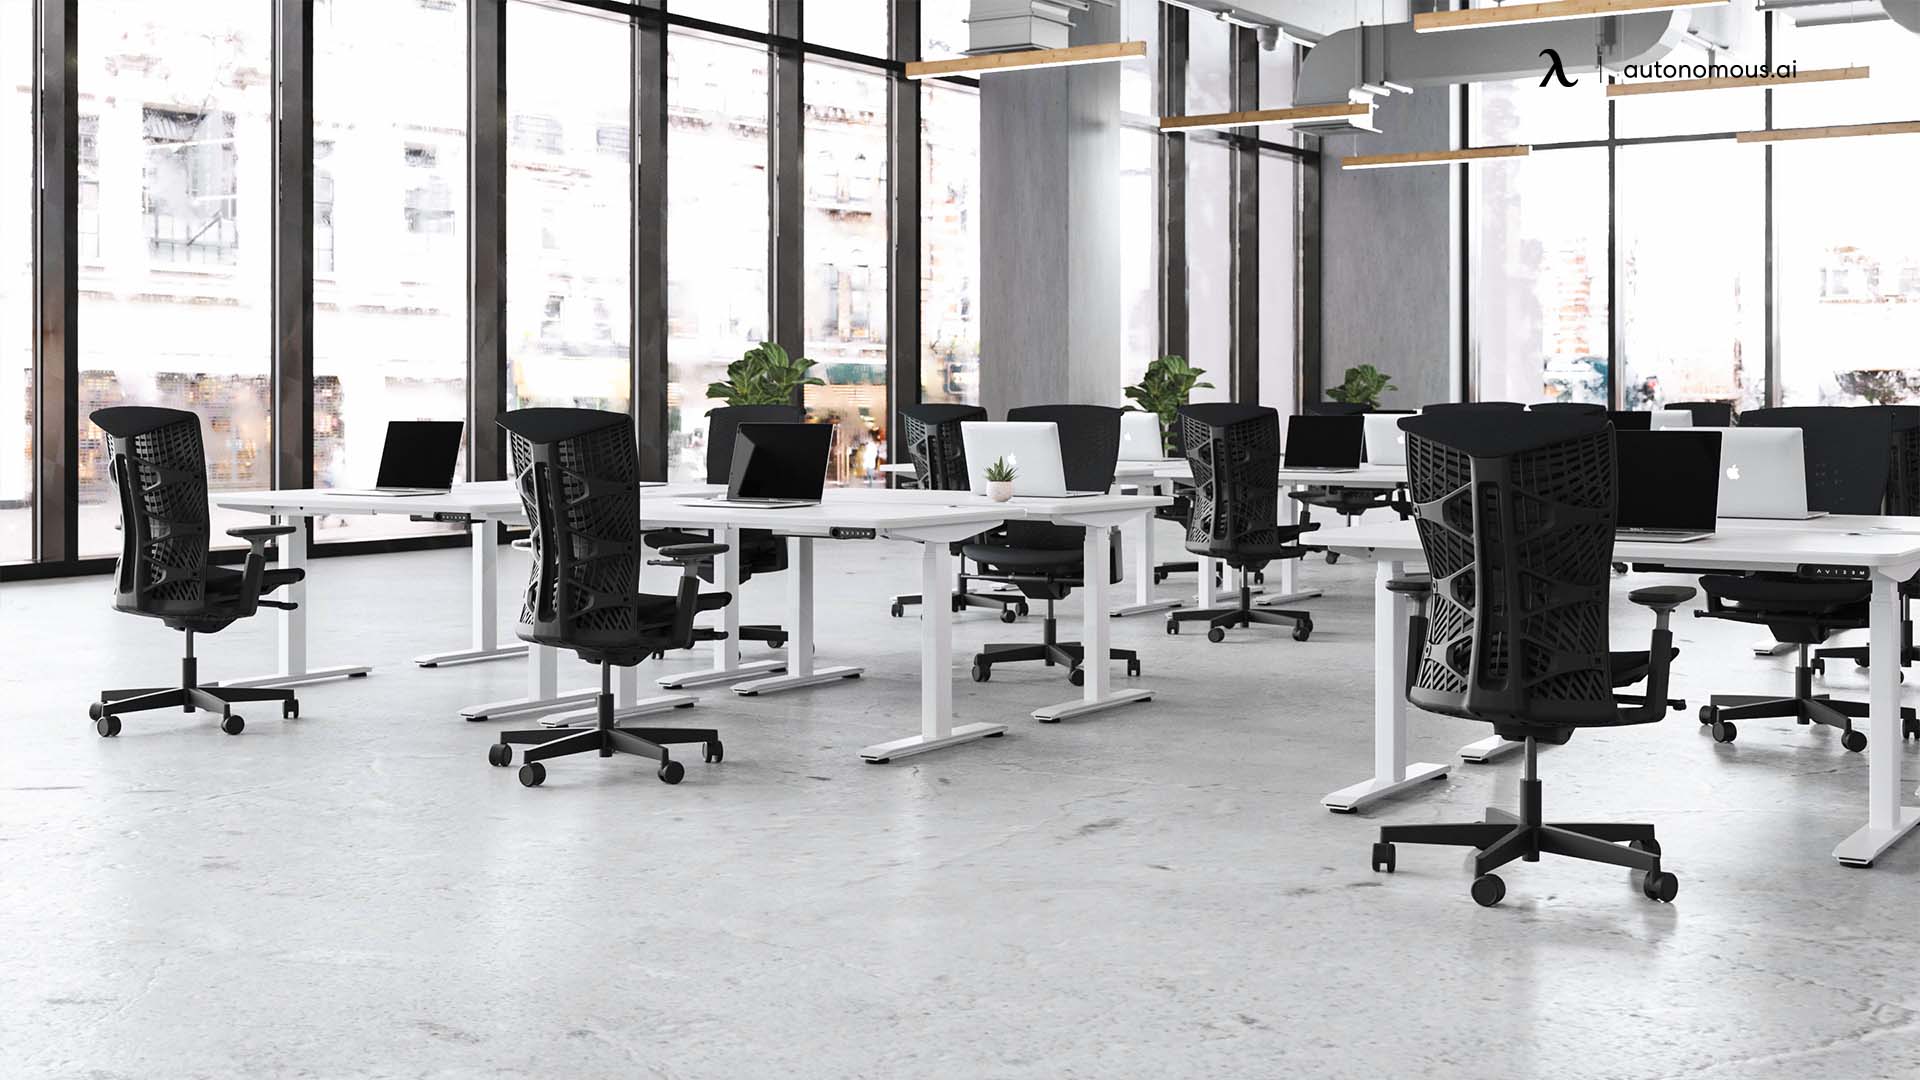 Make Sure Your New Office Is Ready to Welcome You